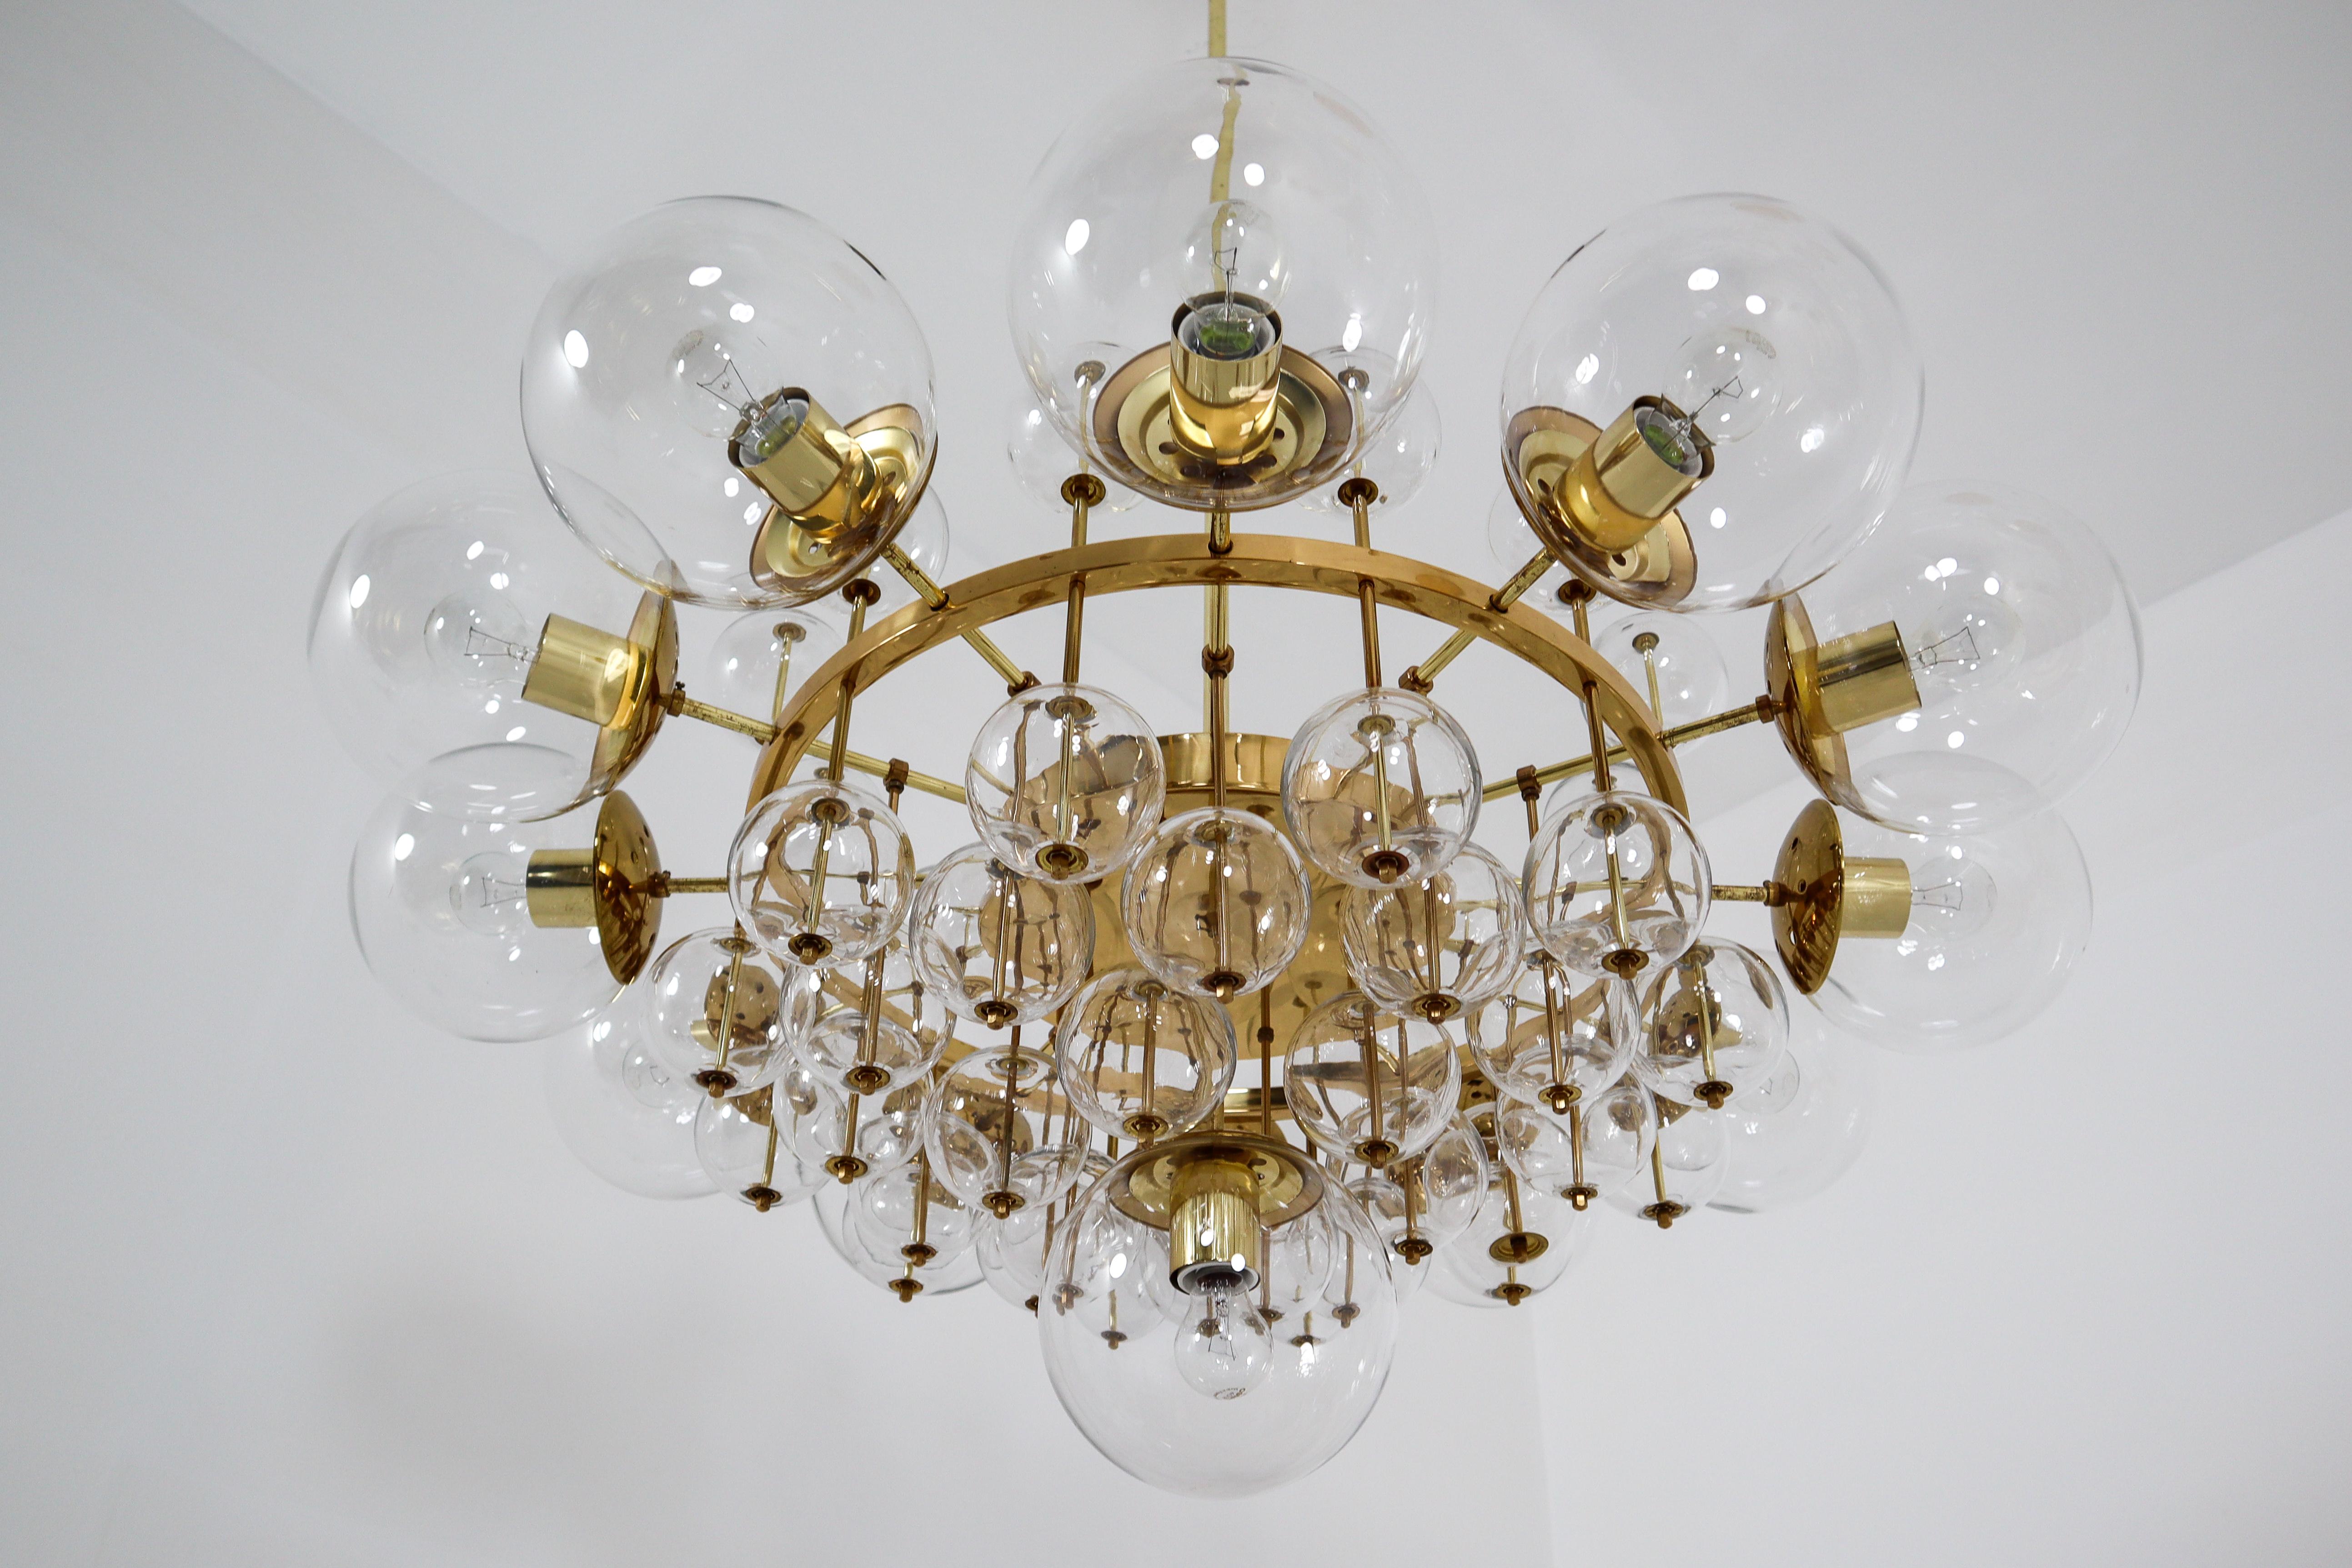 Midcentury Hotel Chandelier with Brass Fixture and Hand-Blowed Glass Globes (Messing)